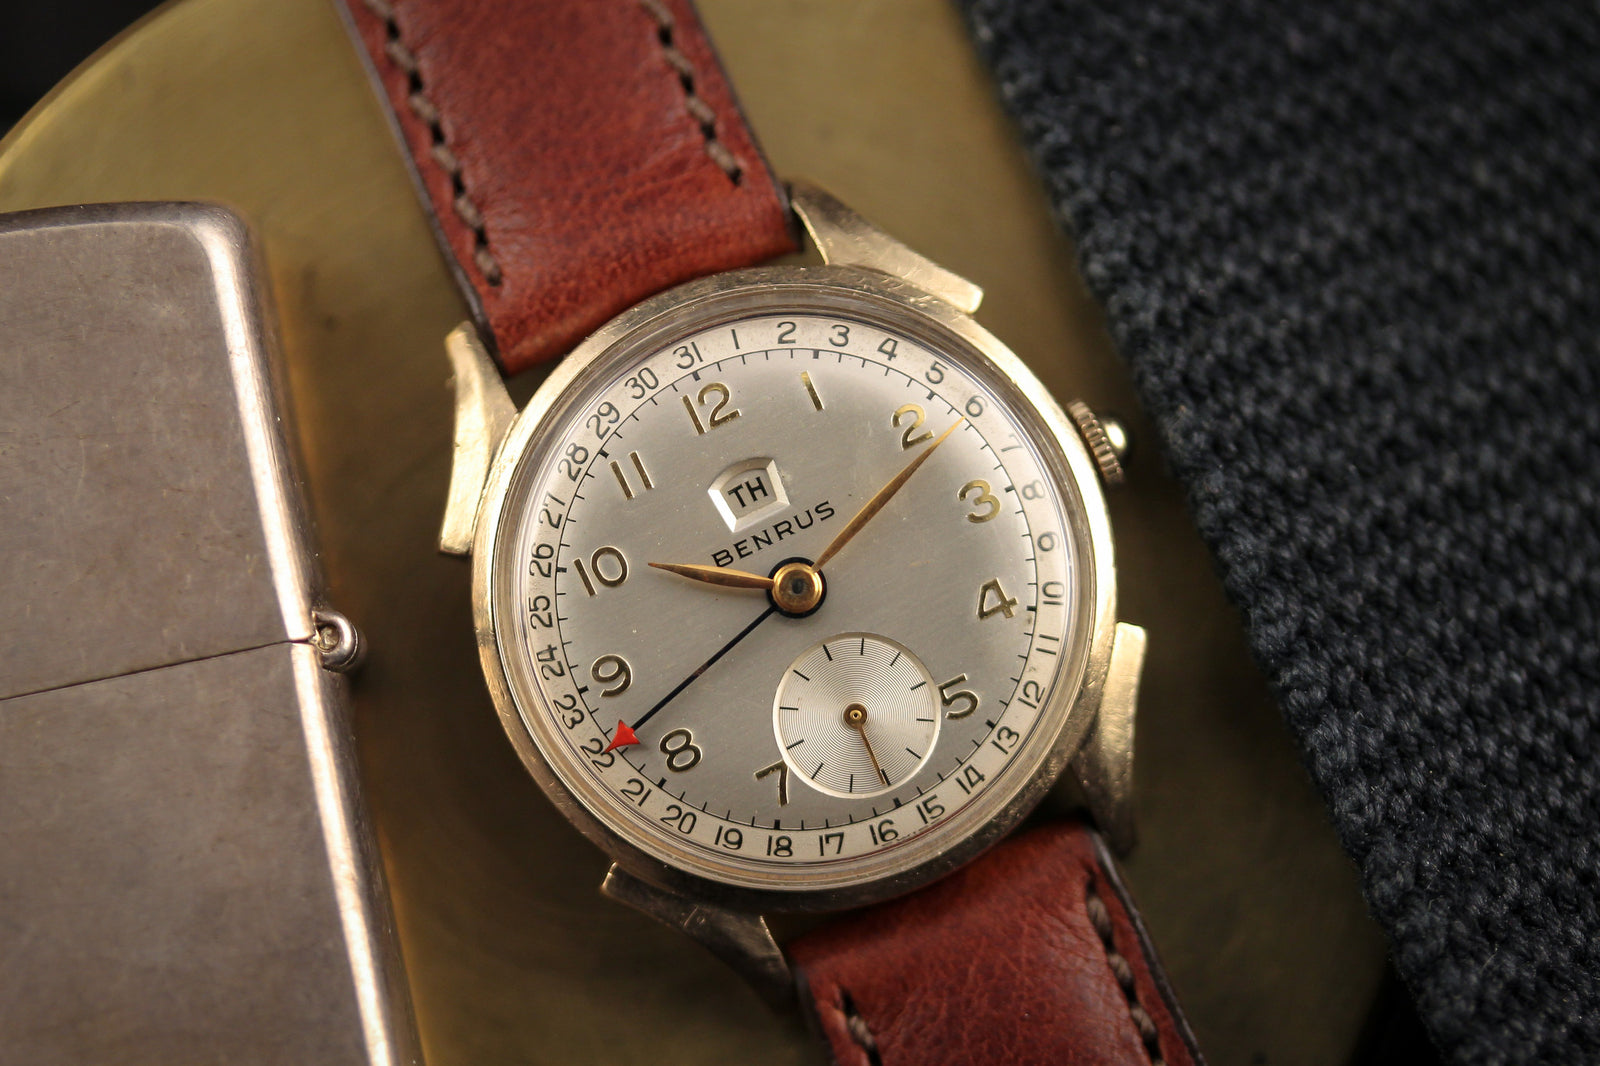 Benrus Day/Date Pointer